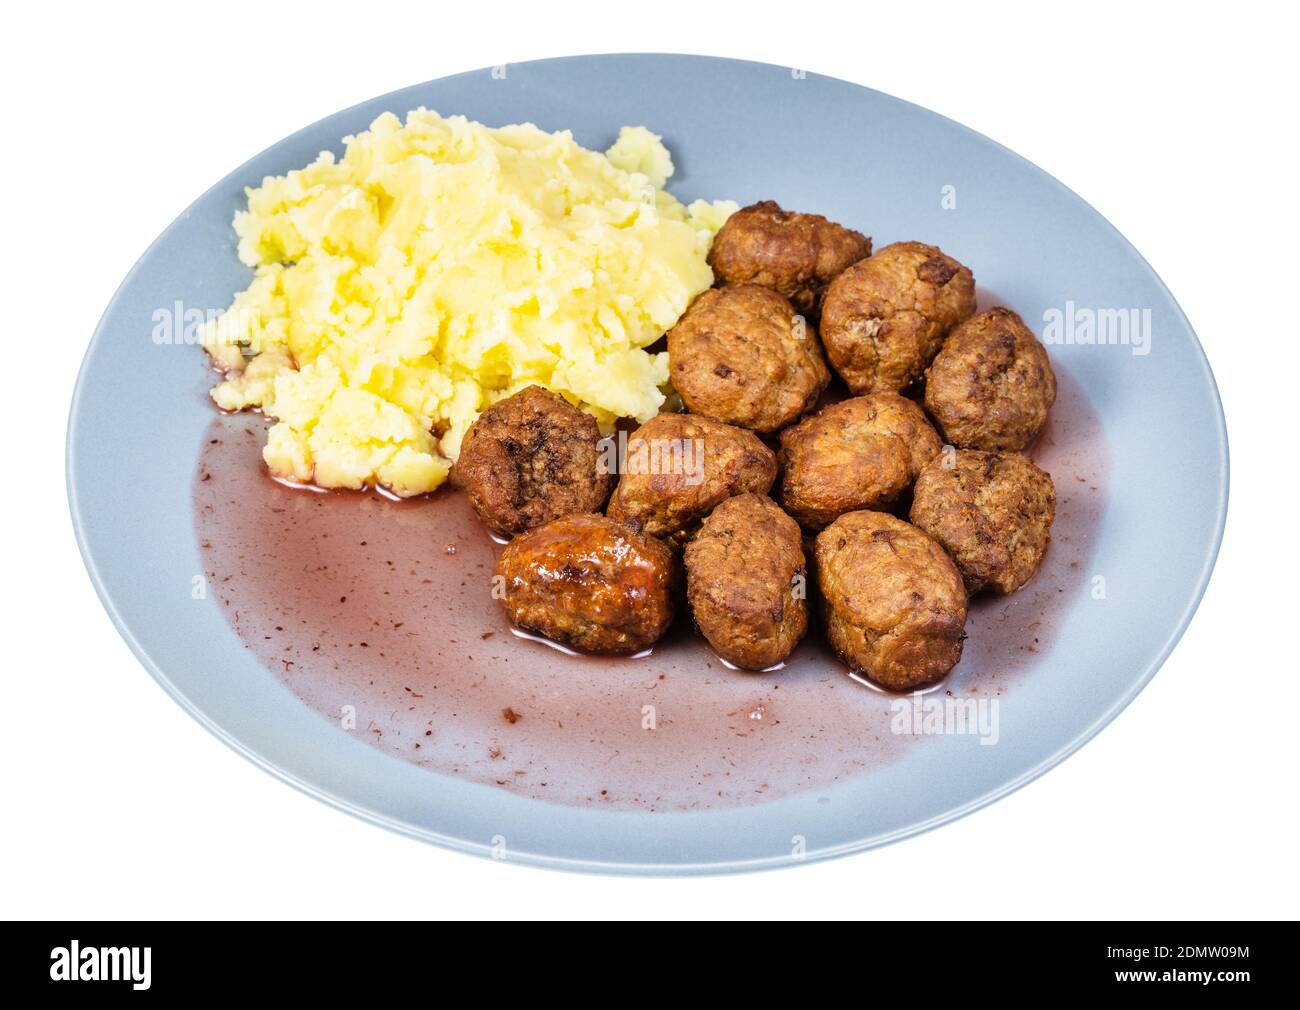 portion of fried swedish meatballs with lingonberry sauce and mashed potatoes on blue plate isolated on white background Stock Photo